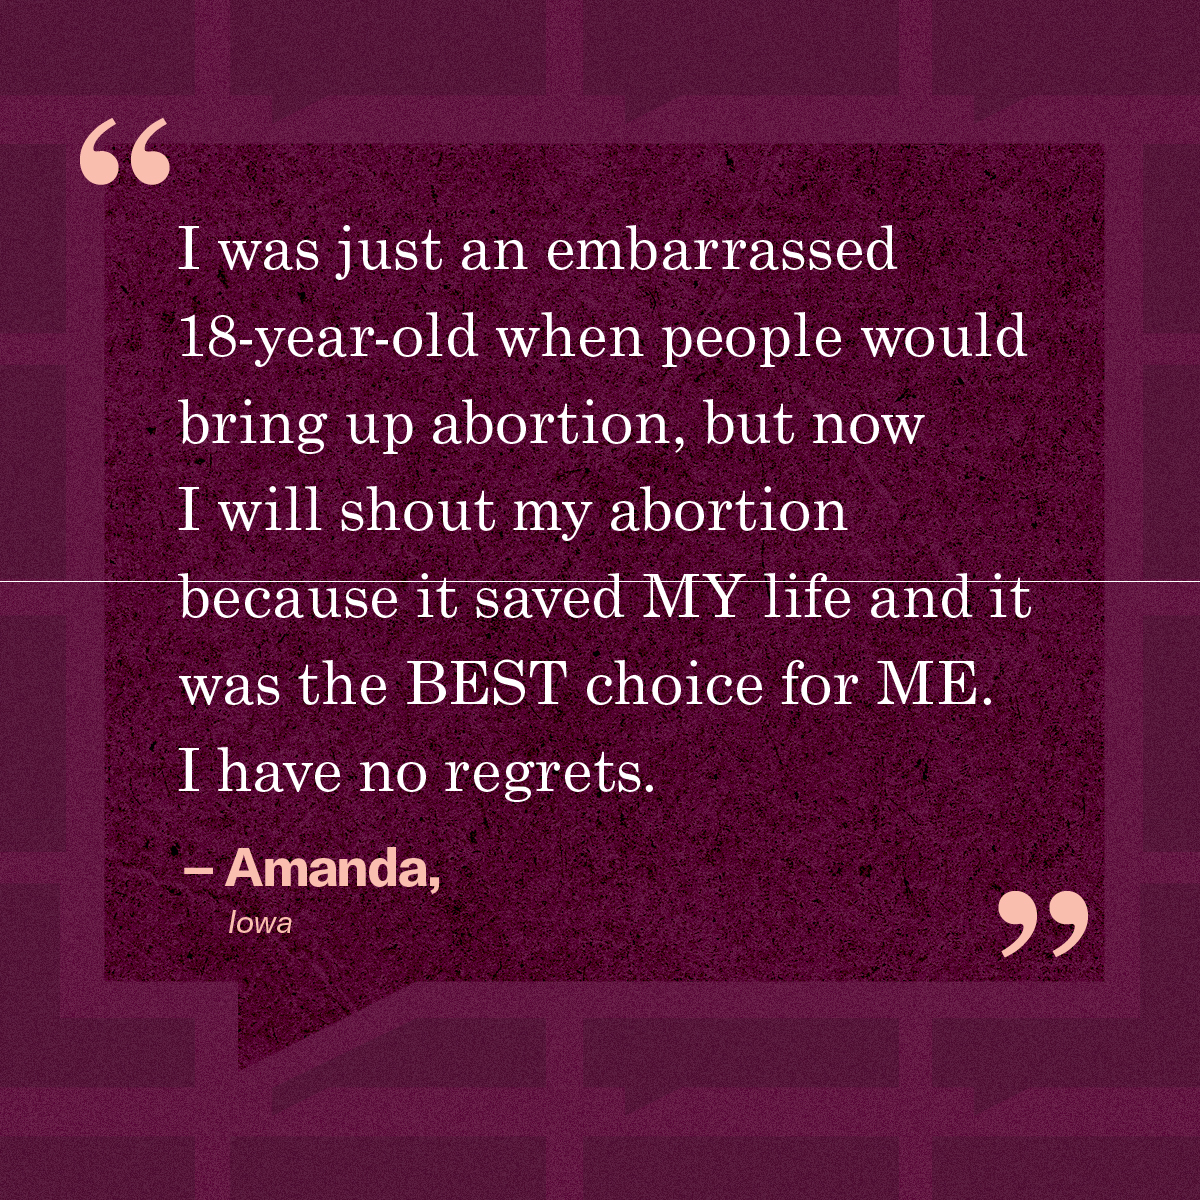 “I was just an embarrassed 18-year-old when people would bring up abortion, but now I will shout my abortion because it saved MY life and it was the BEST choice for ME. I have no regrets.” – Amanda, Iowa